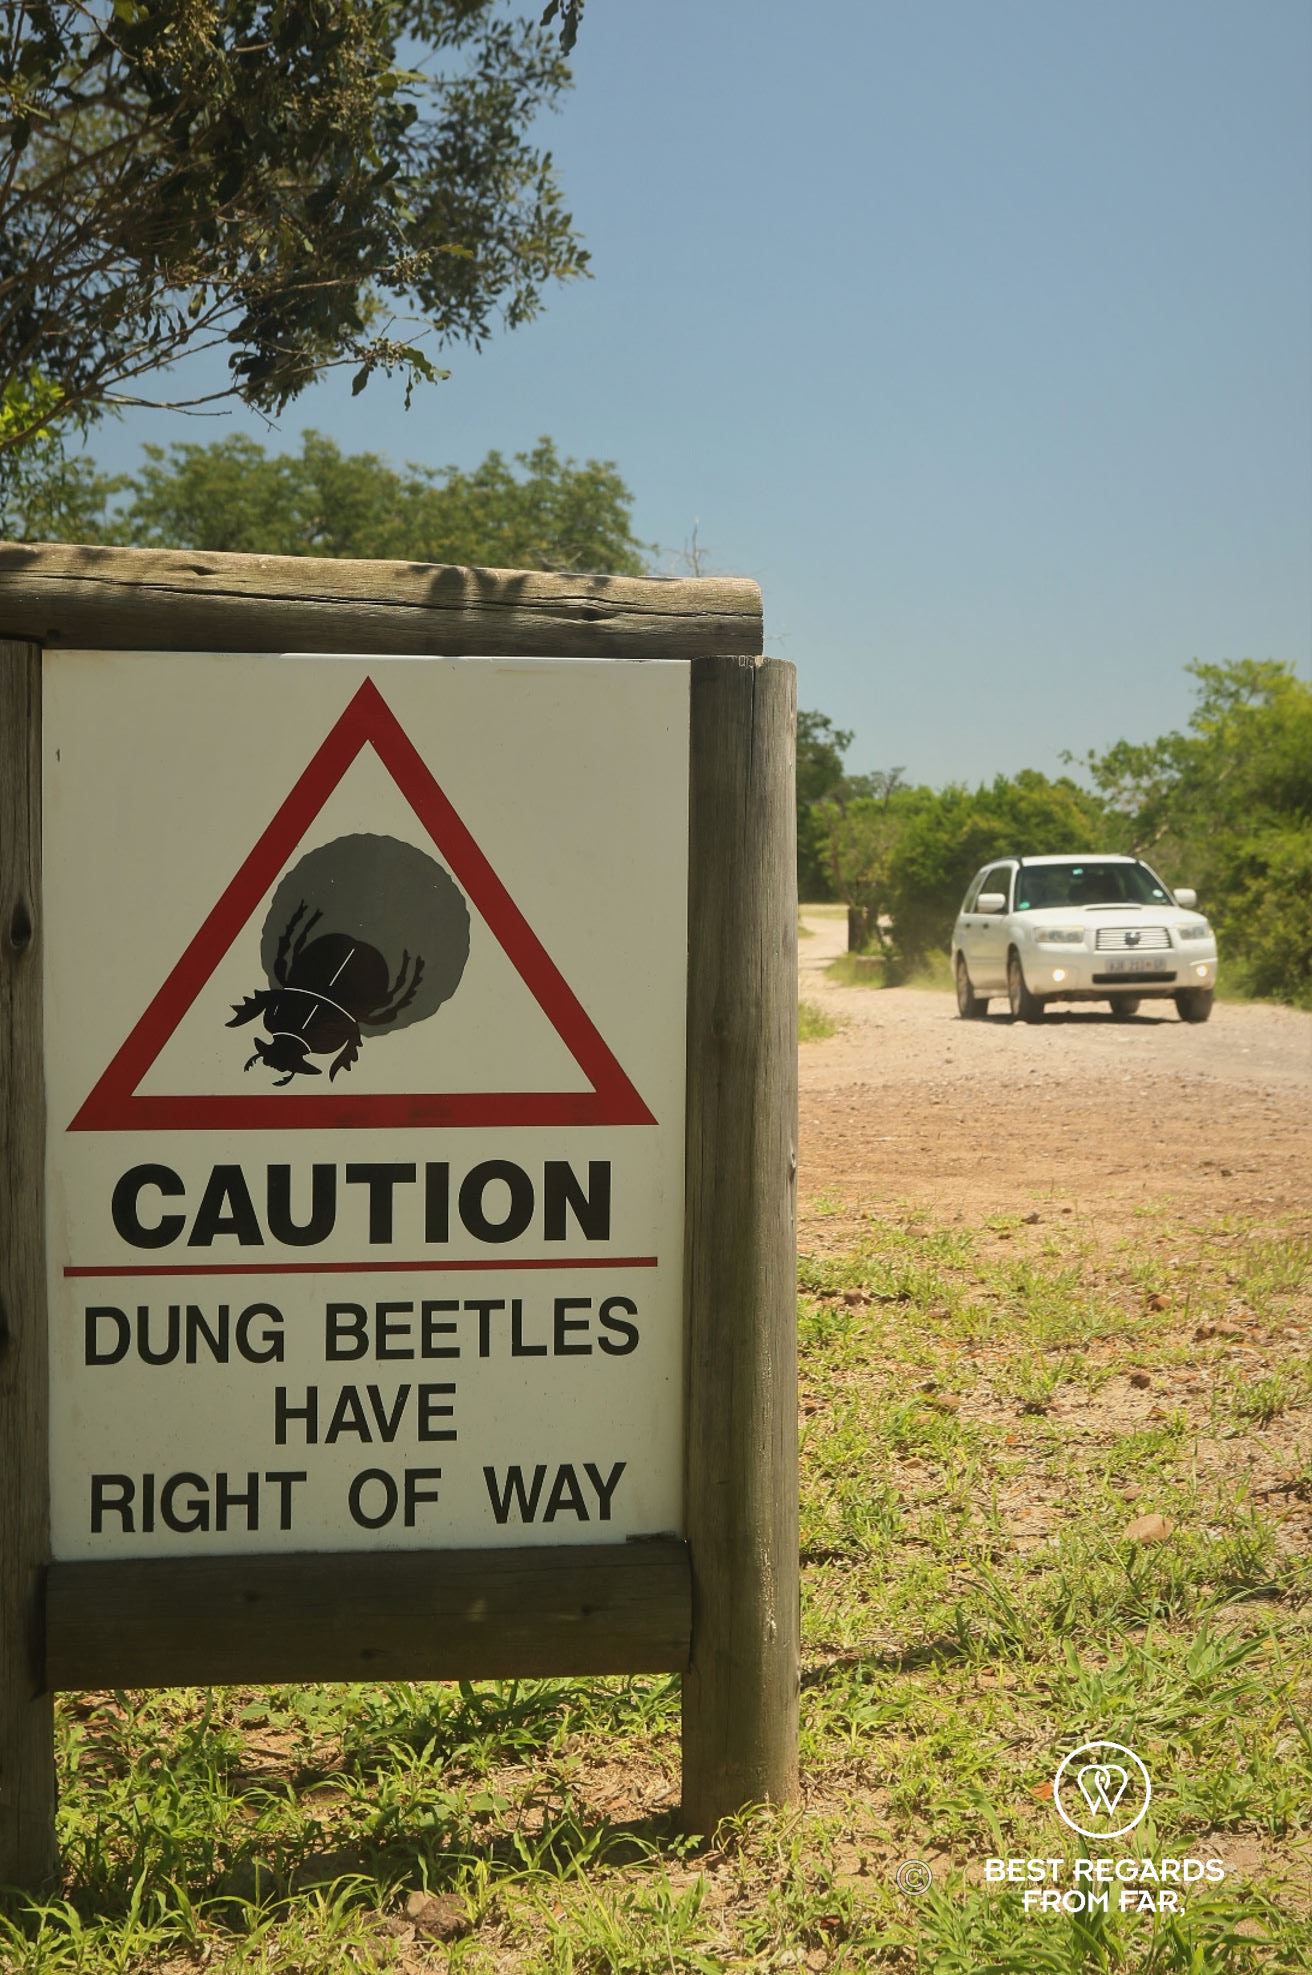 Caution sign for dung beetles self-driving the safari parks, Tembe elephant park, South Africa